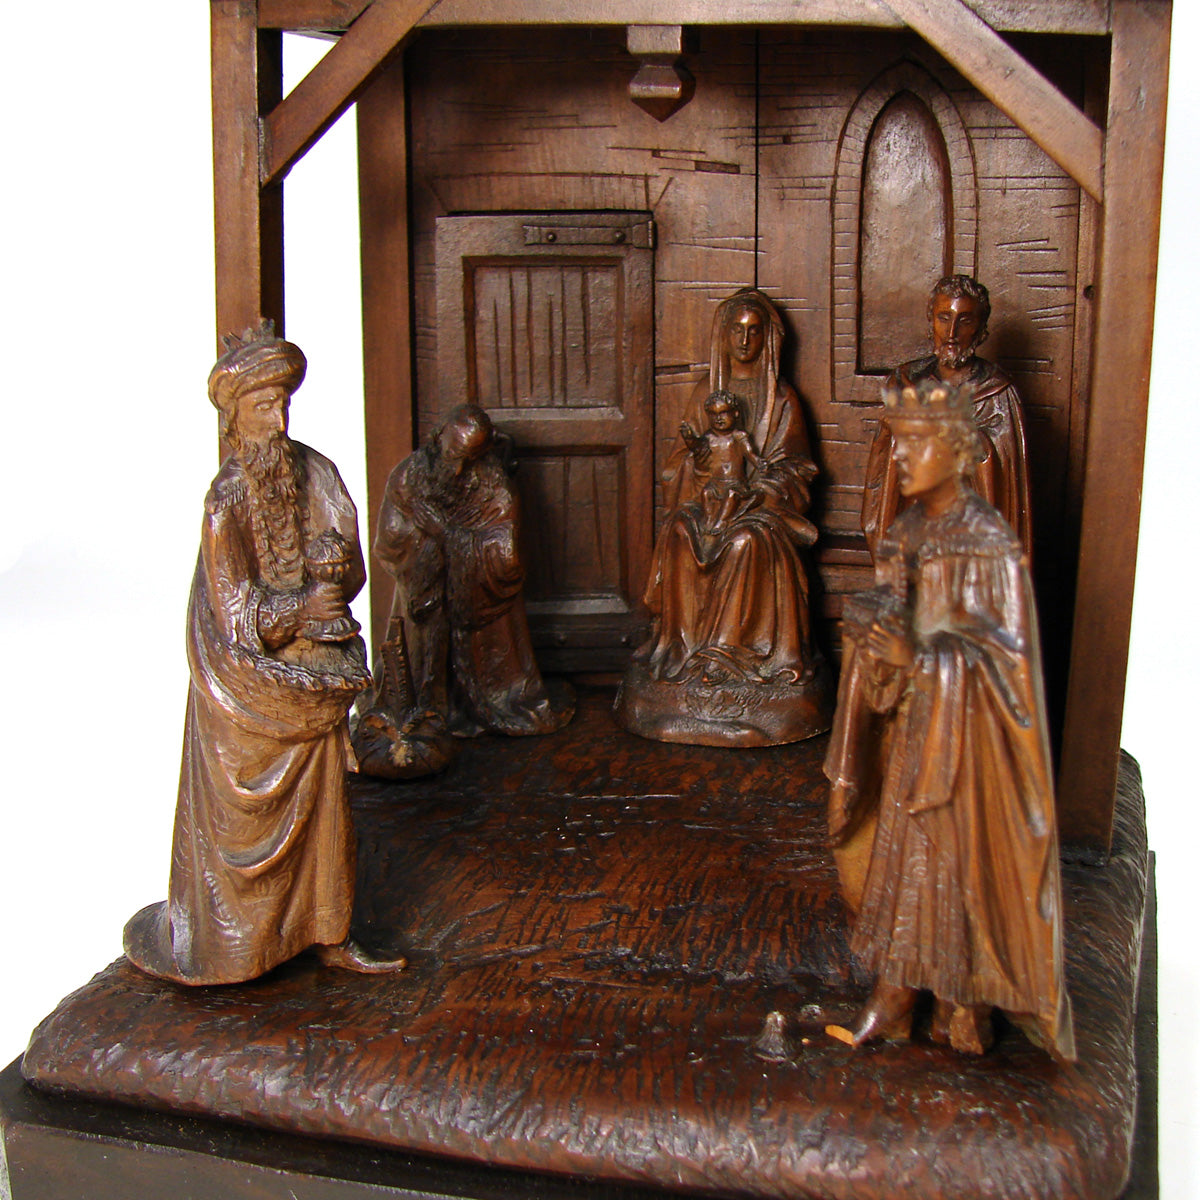 Exq Antique French or Italian Hand Carved Black Forest Style 10" Nativity Scene, Mary & Child Christ